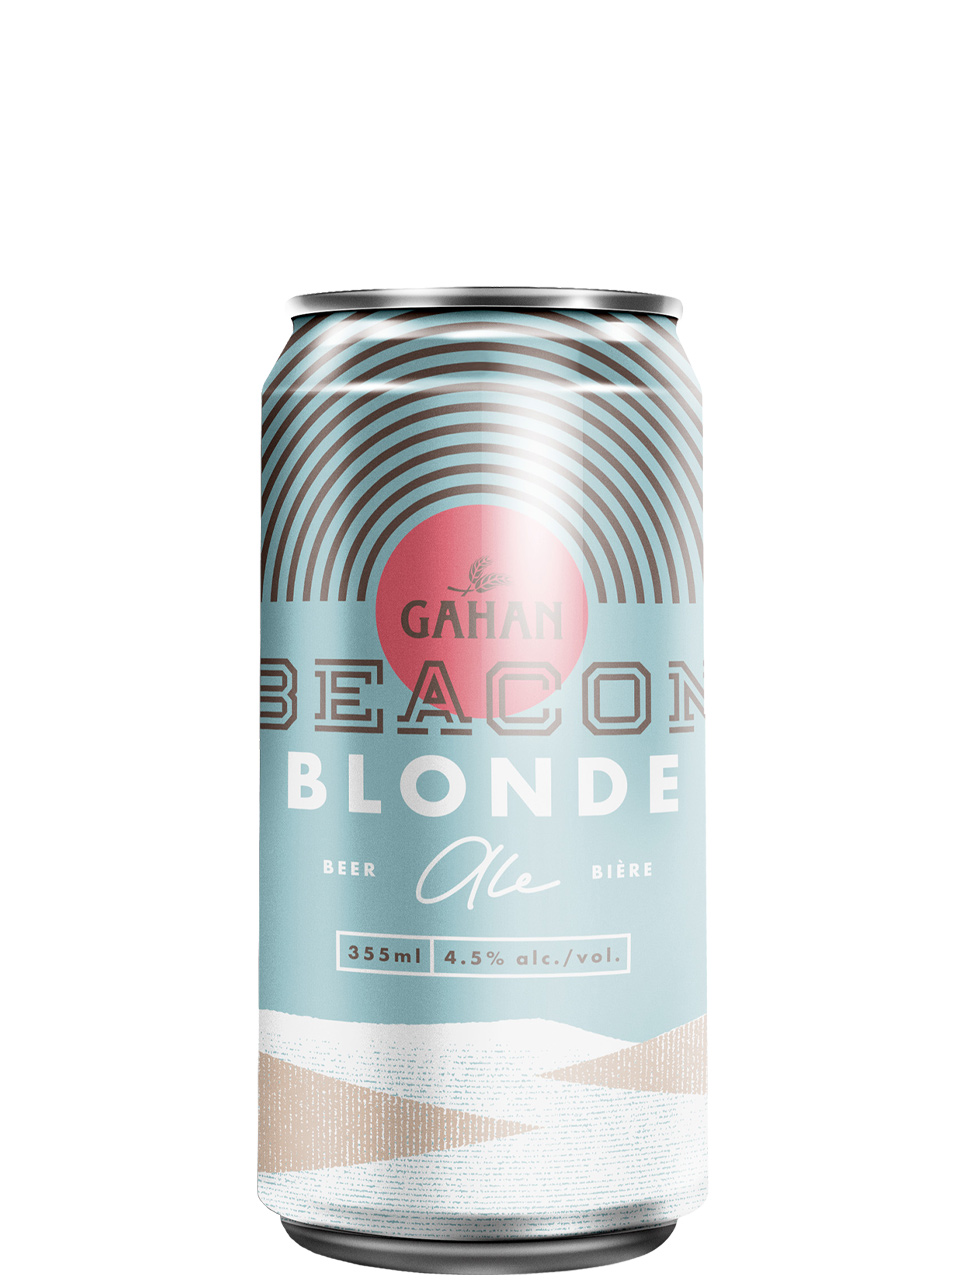 Gahan Beacon Blonde Ale 15 Pack Cans